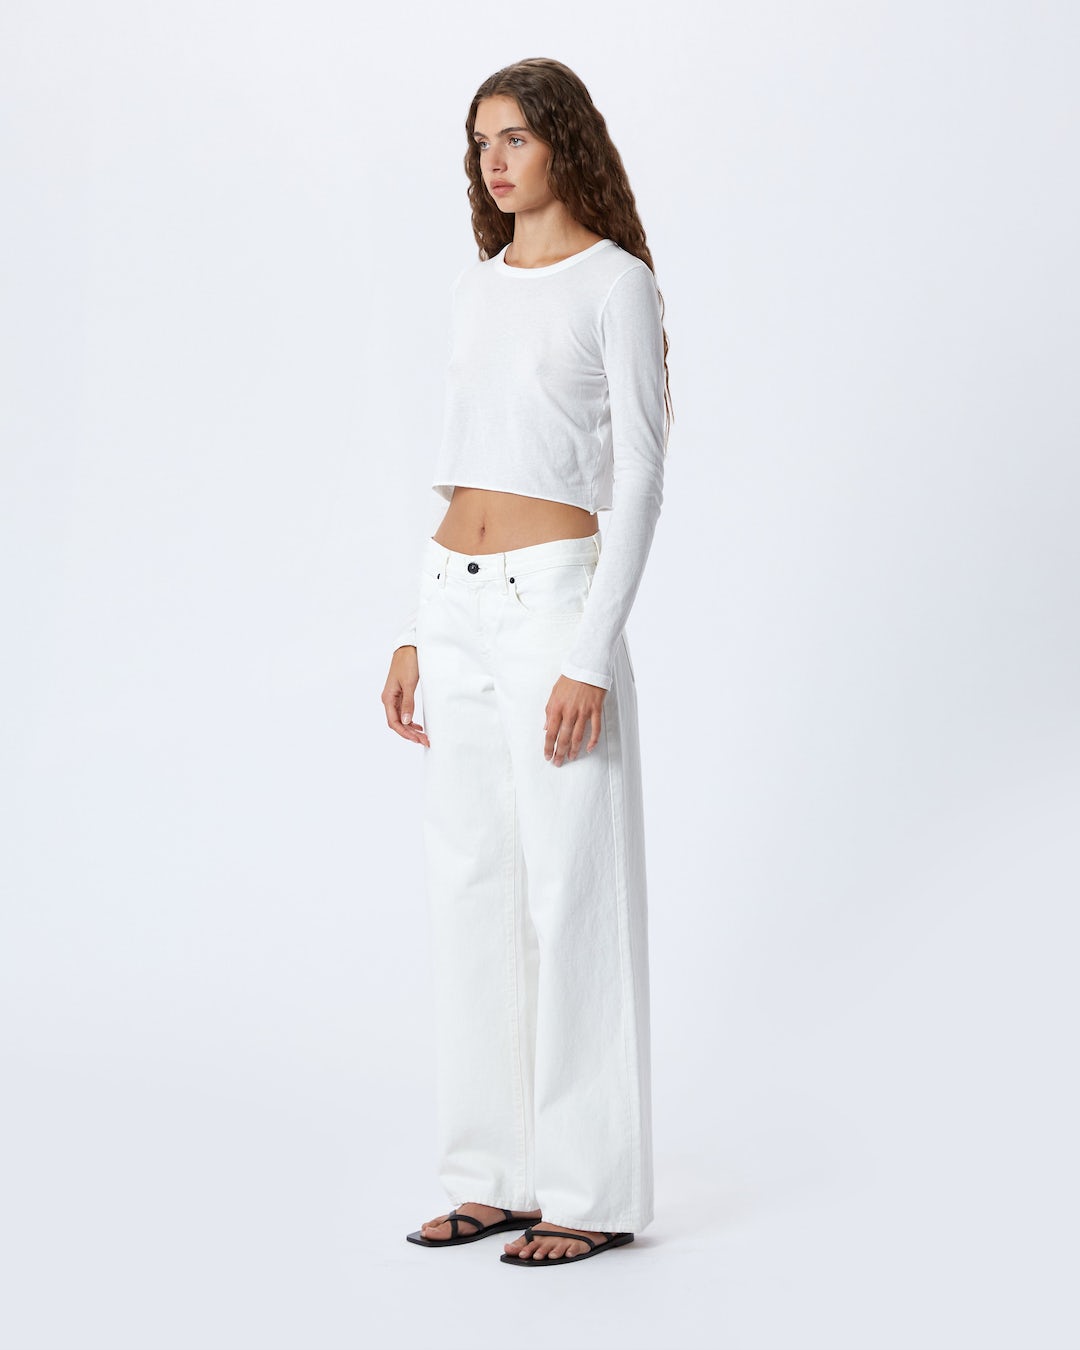 Slvrlake Mica Low Rise Wide Leg Jean in White available at TNT The New Trend Australia. Free shipping on orders over $300 AUD.